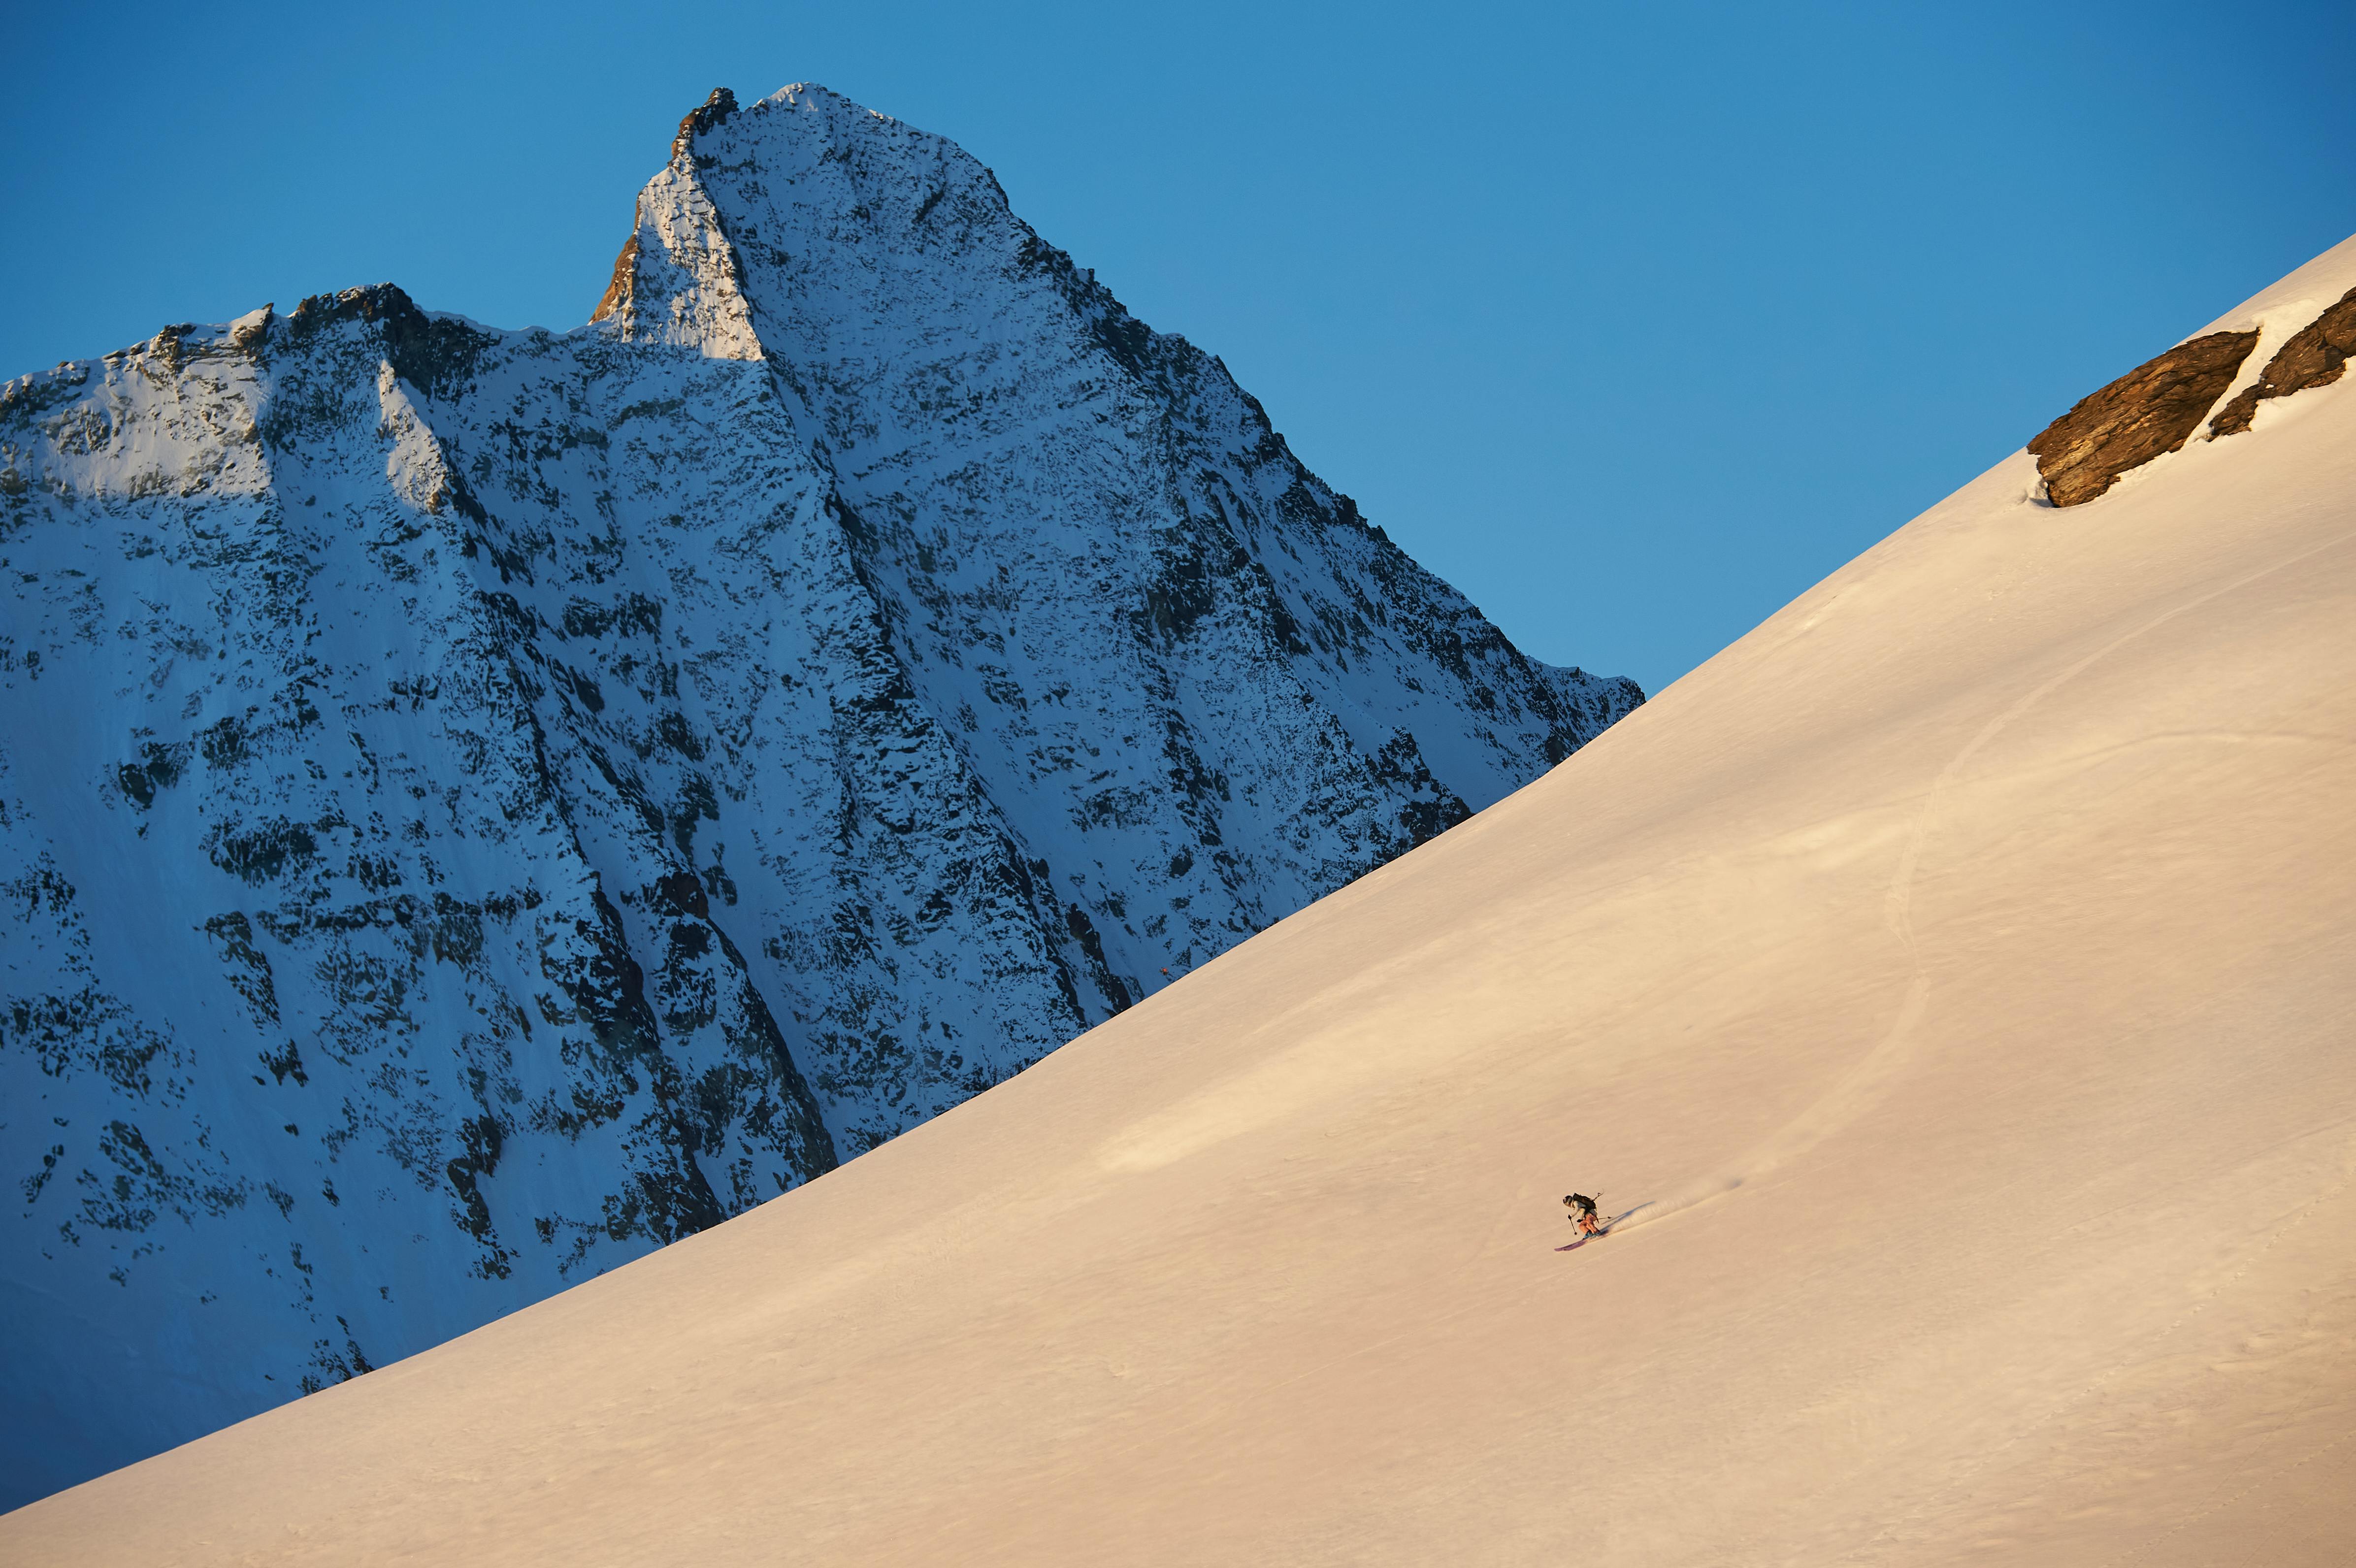 A solo skier skiing down a snowy backcountry mountain at sunrise